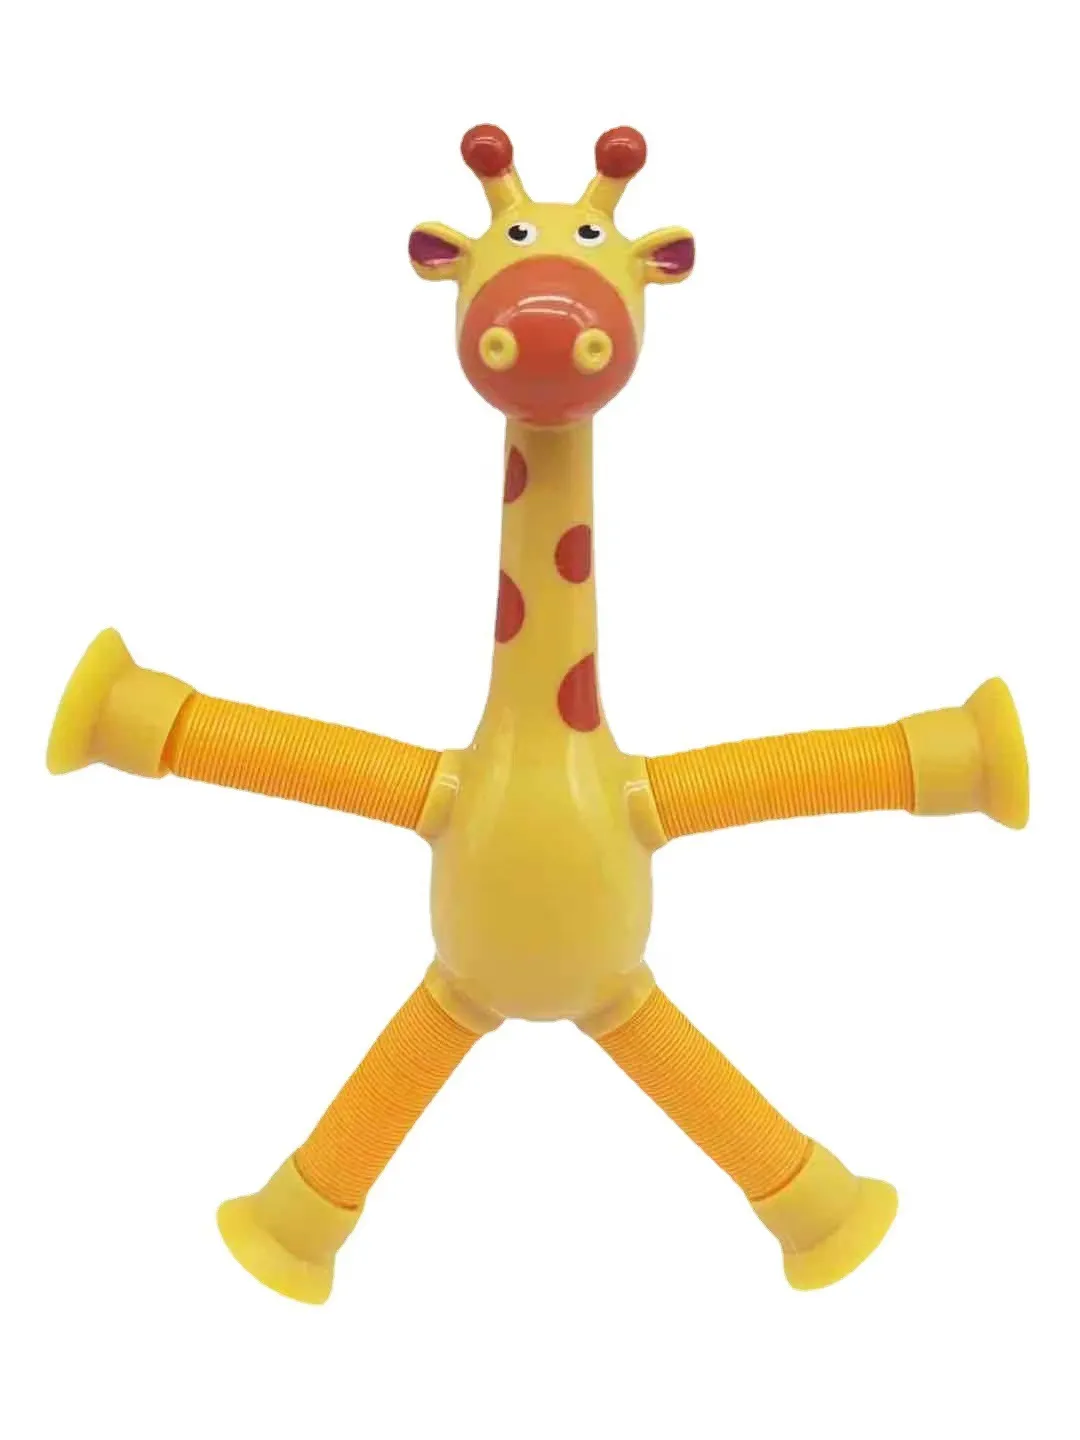 ✨Summer Toys Hot Sale 45% OFF✨- Suction Cup Pop Tube Giraffe Toys